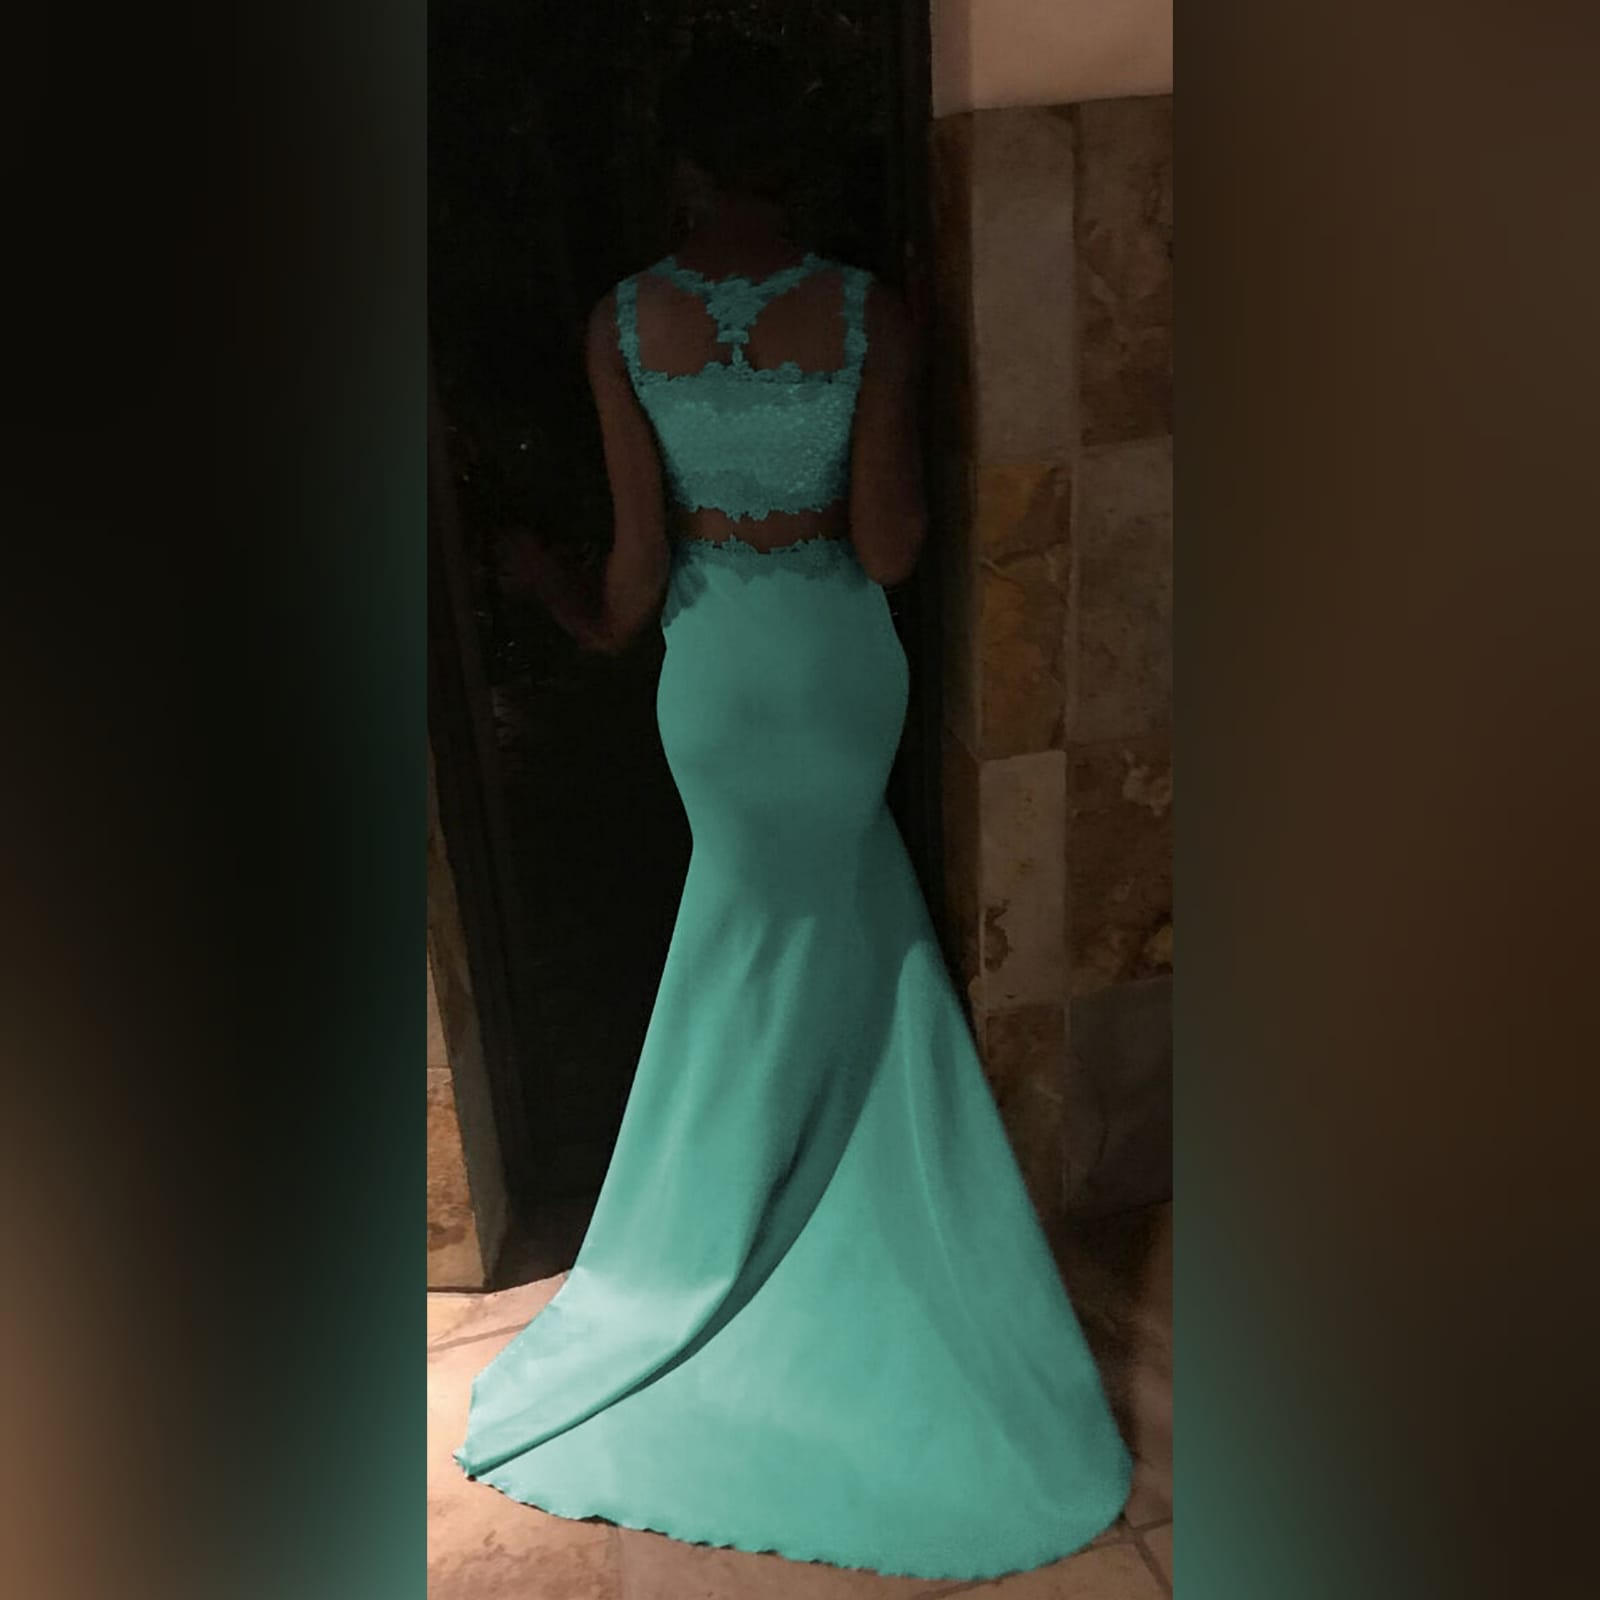 Illusion 2 piece mint green soft mermaid prom dress 8 illusion 2 piece mint green soft mermaid prom dress with a lace bodice and illusion lace neckline